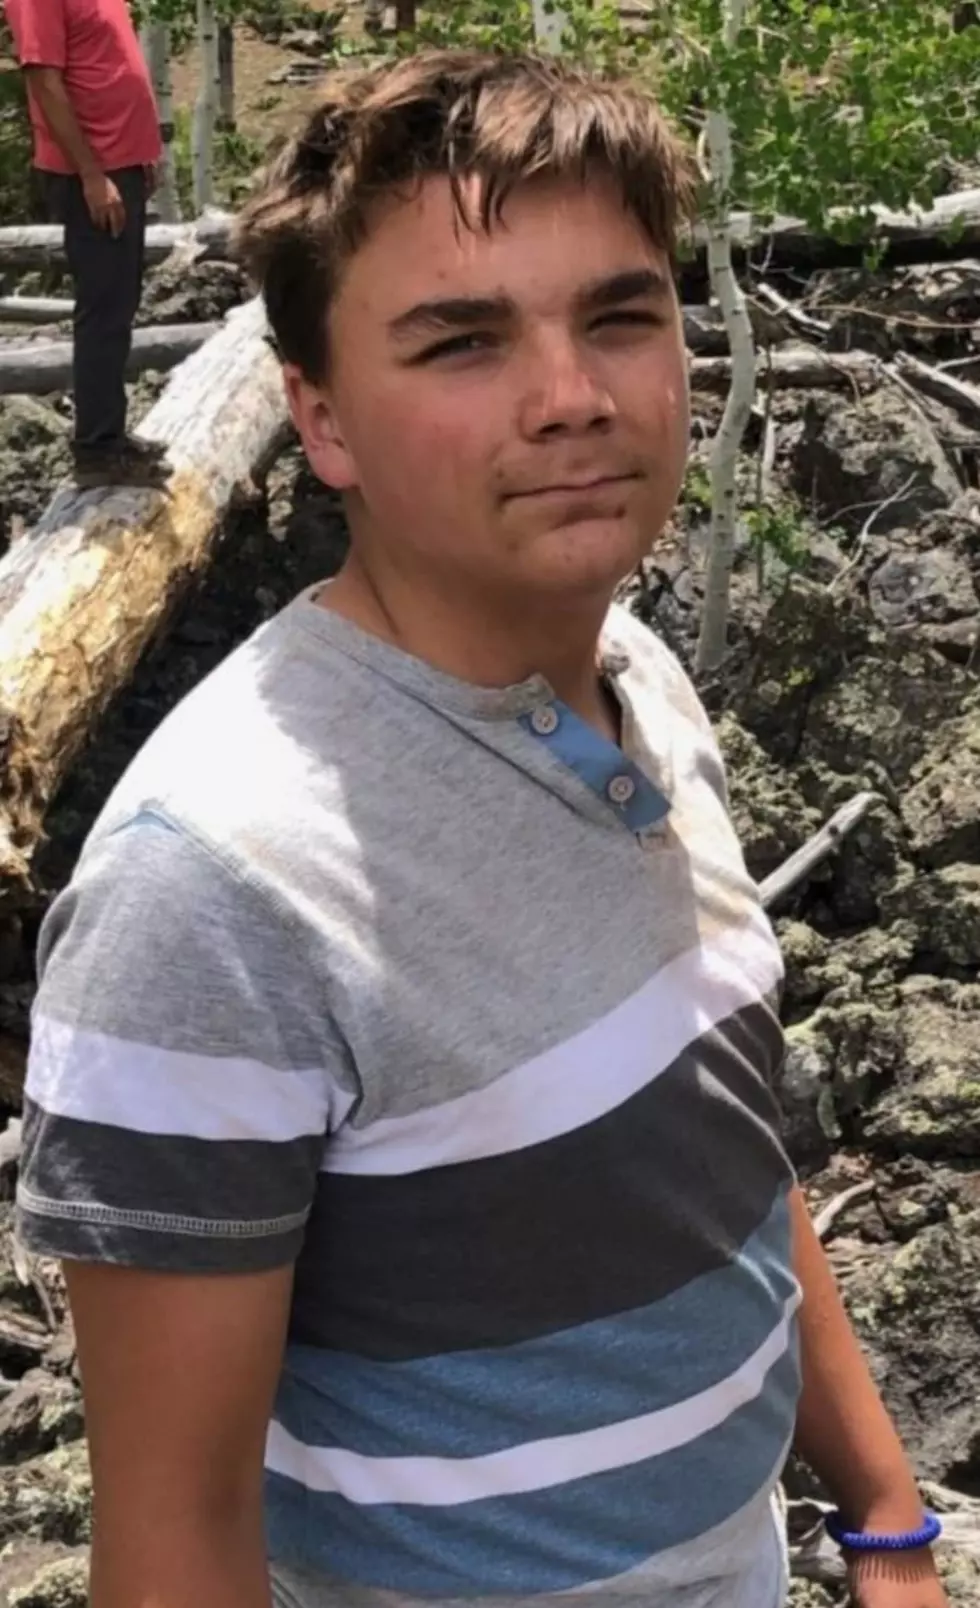 Missing 15-year-old hiker found